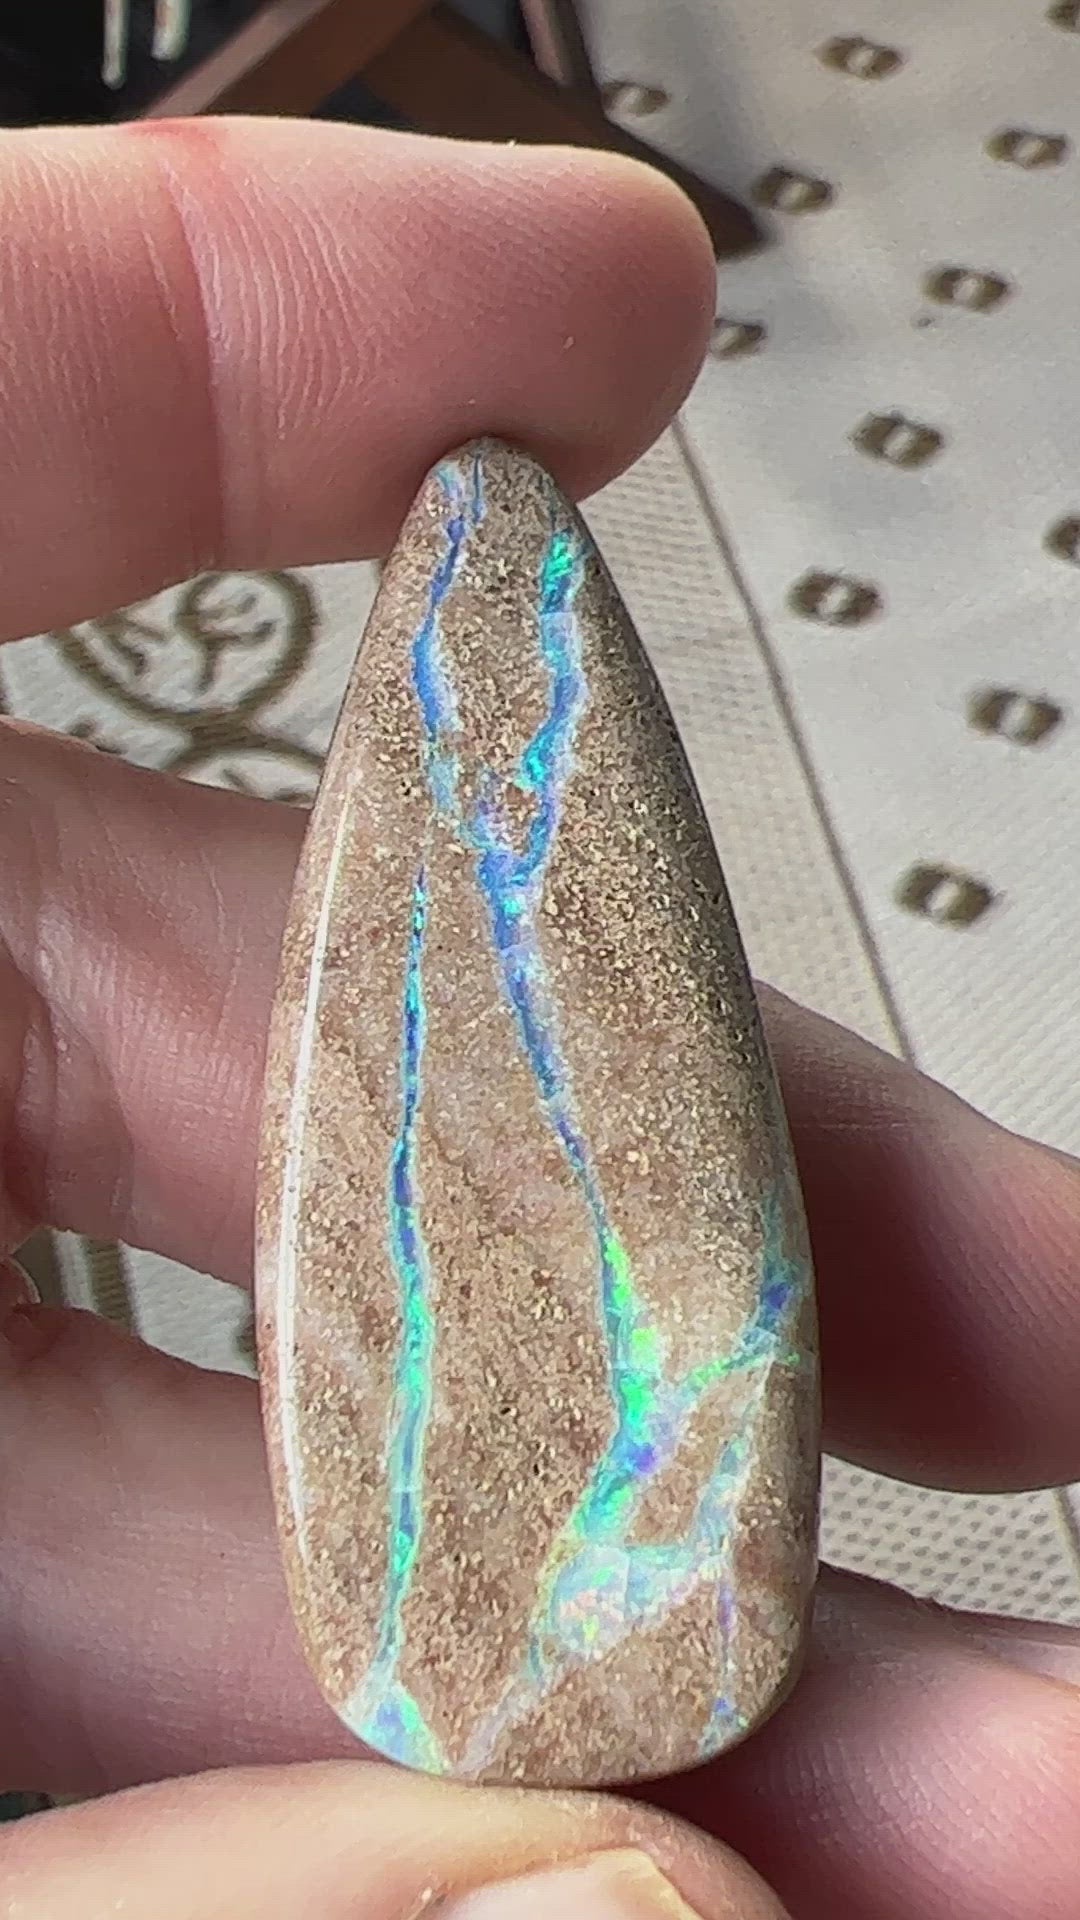 Rare Andamooka cap rock opal. Beautiful aqua and green coloured lines throughout. Would make a statement piece pendant.